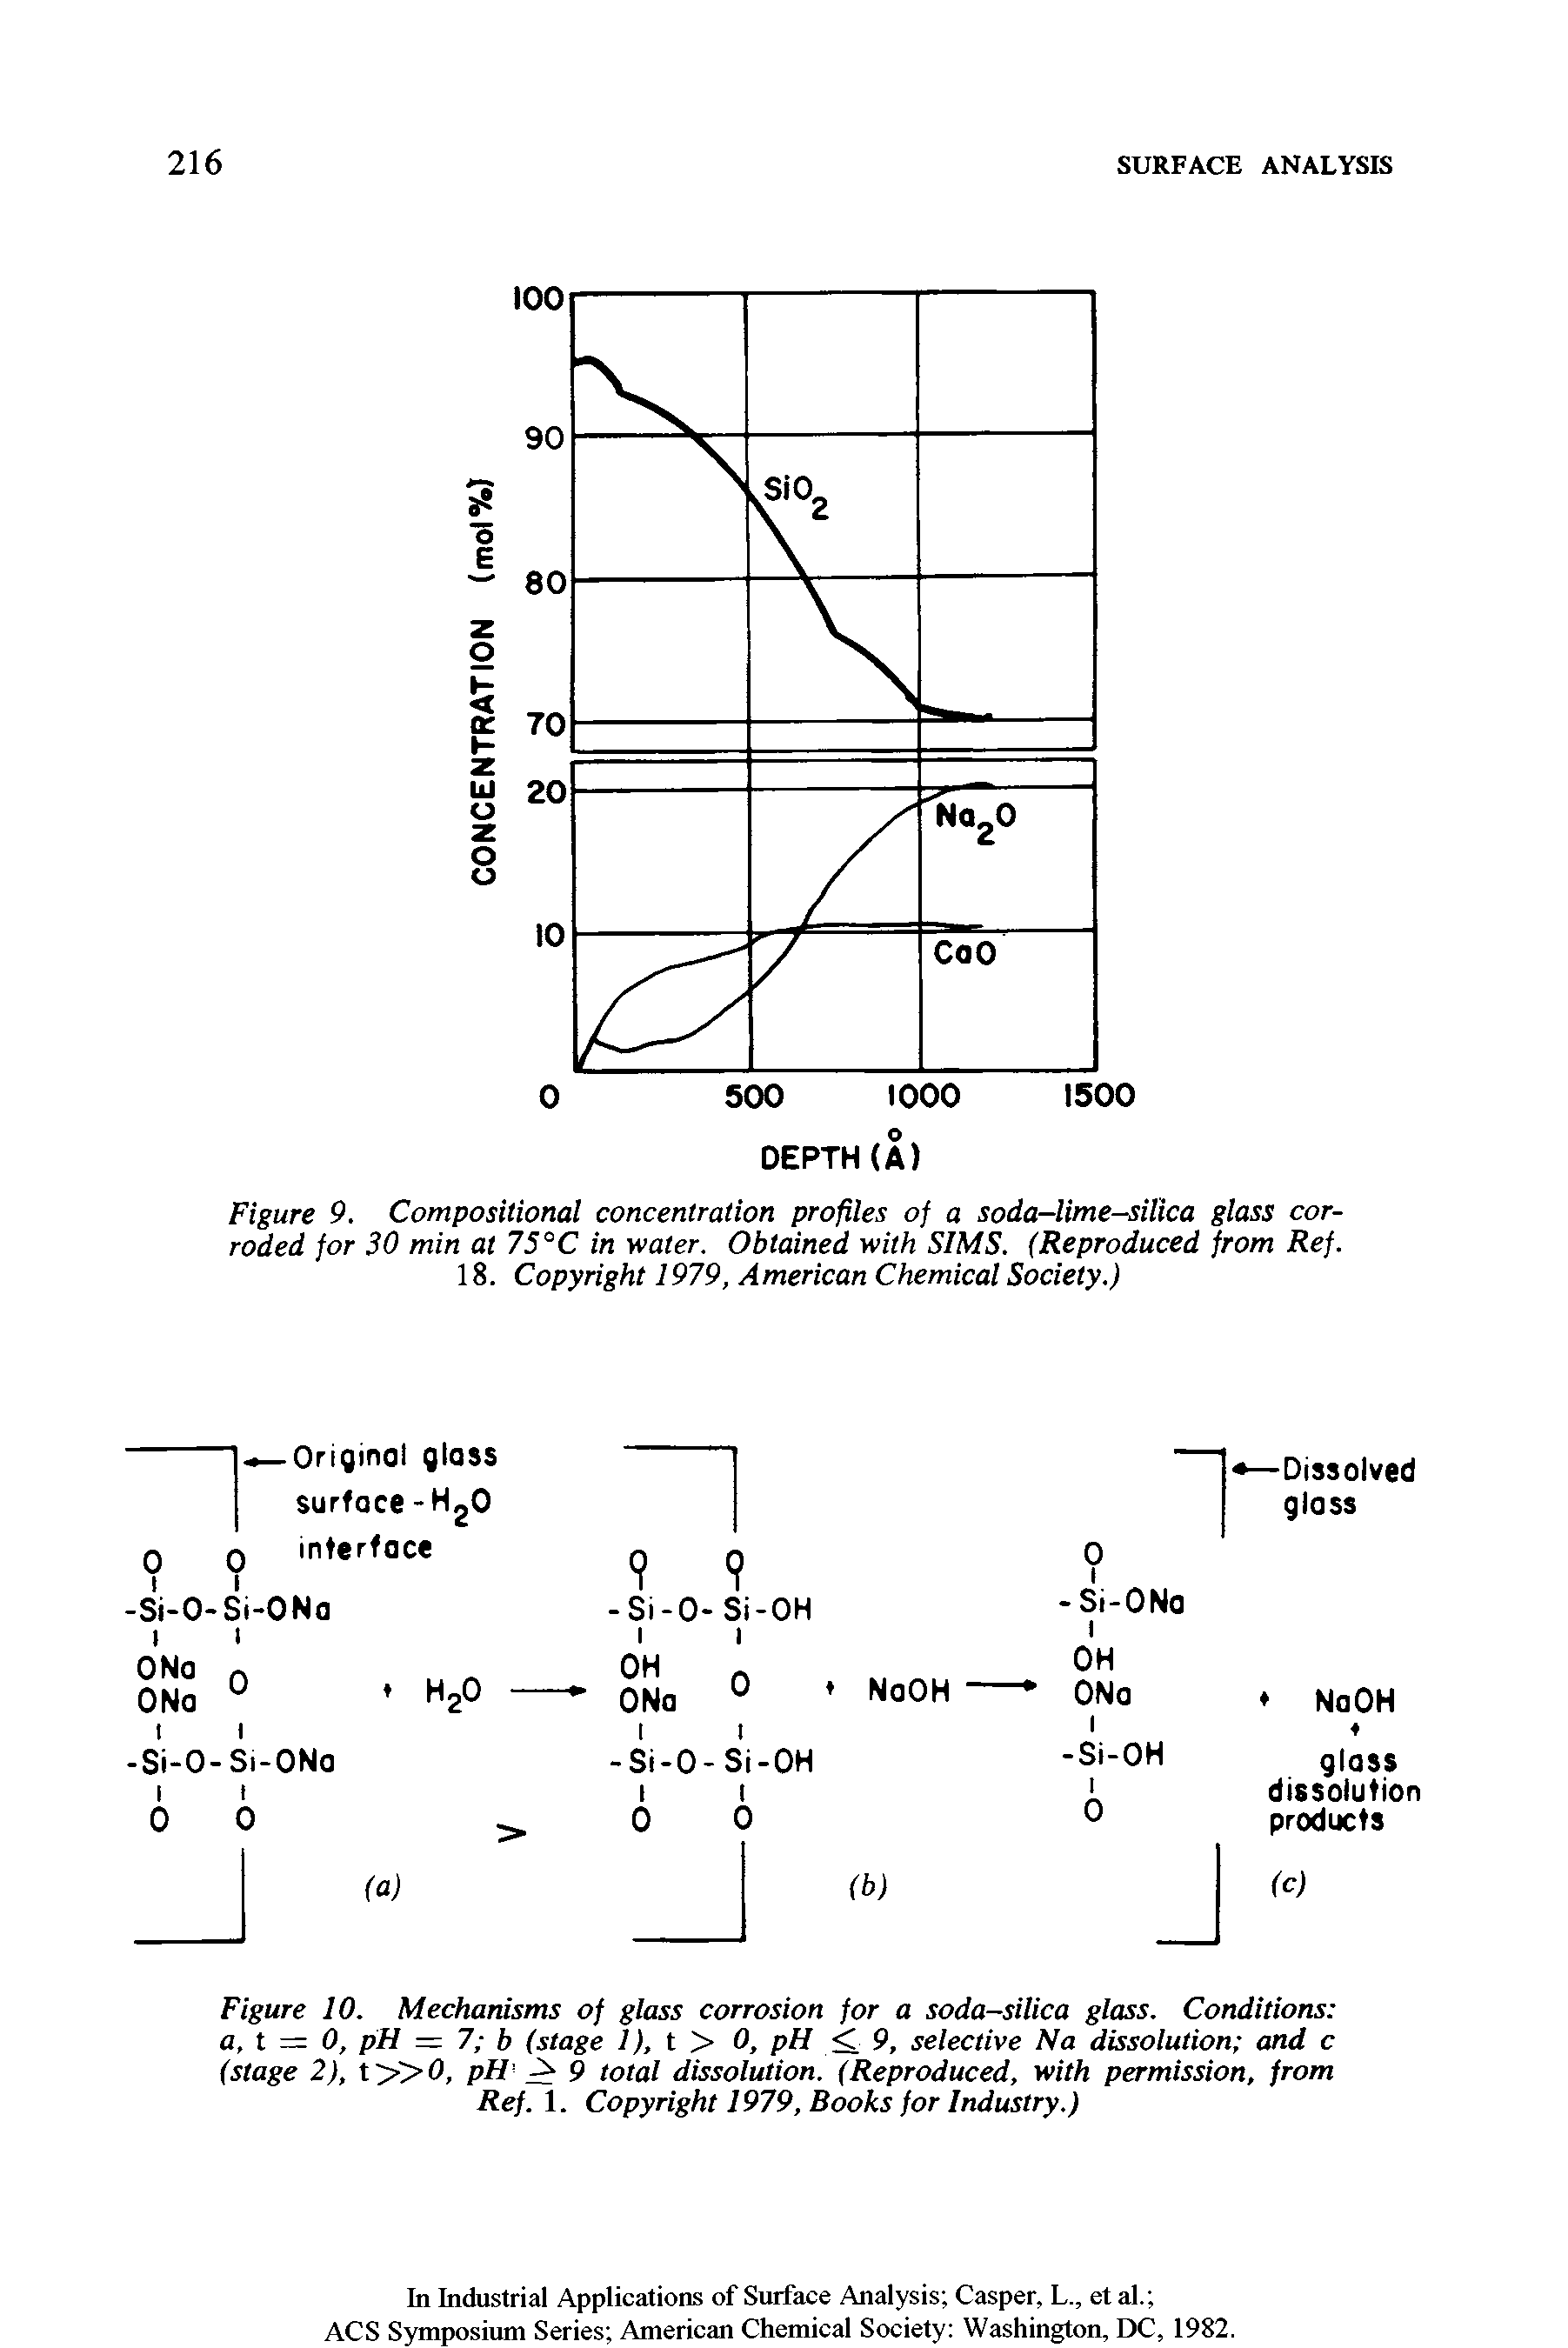 Figure 10. Mechanisms of glass corrosion for a soda-silica glass. Conditions a, t = 0, pH = 7 b (stage 1), t > 0, pH < 9, selective Na dissolution and c (stage 2), t 0, pH 9 total dissolution. (Reproduced, with permission, from Ref. 1. Copyright 1979, Books for Industry.)...